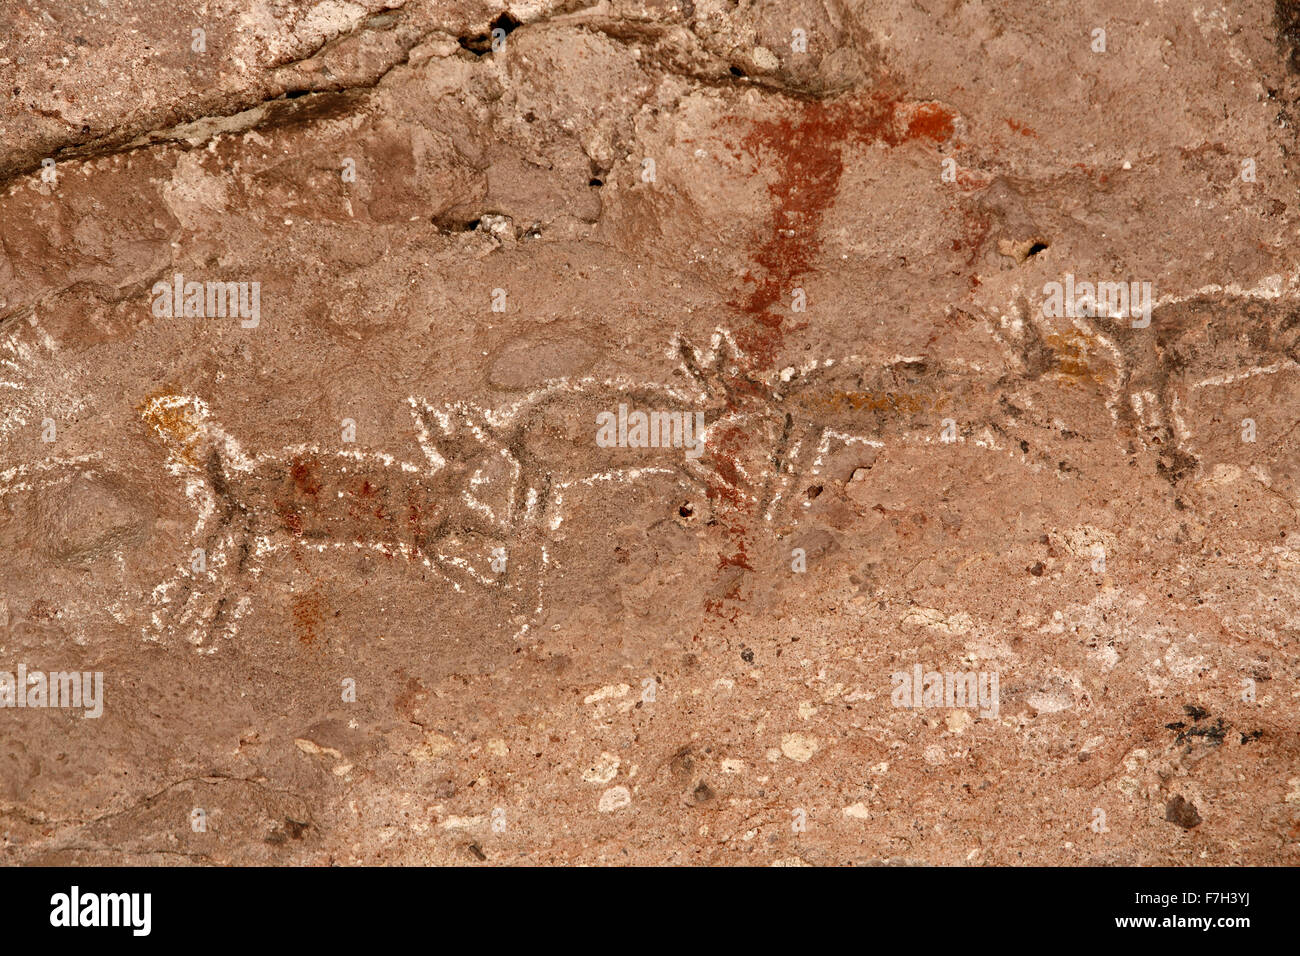 pr5408-D. petroglyphs and rock paintings of Santa Marta, which depict people, animals (deer, rabbits, fish, more). Baja, Mexico. Stock Photo